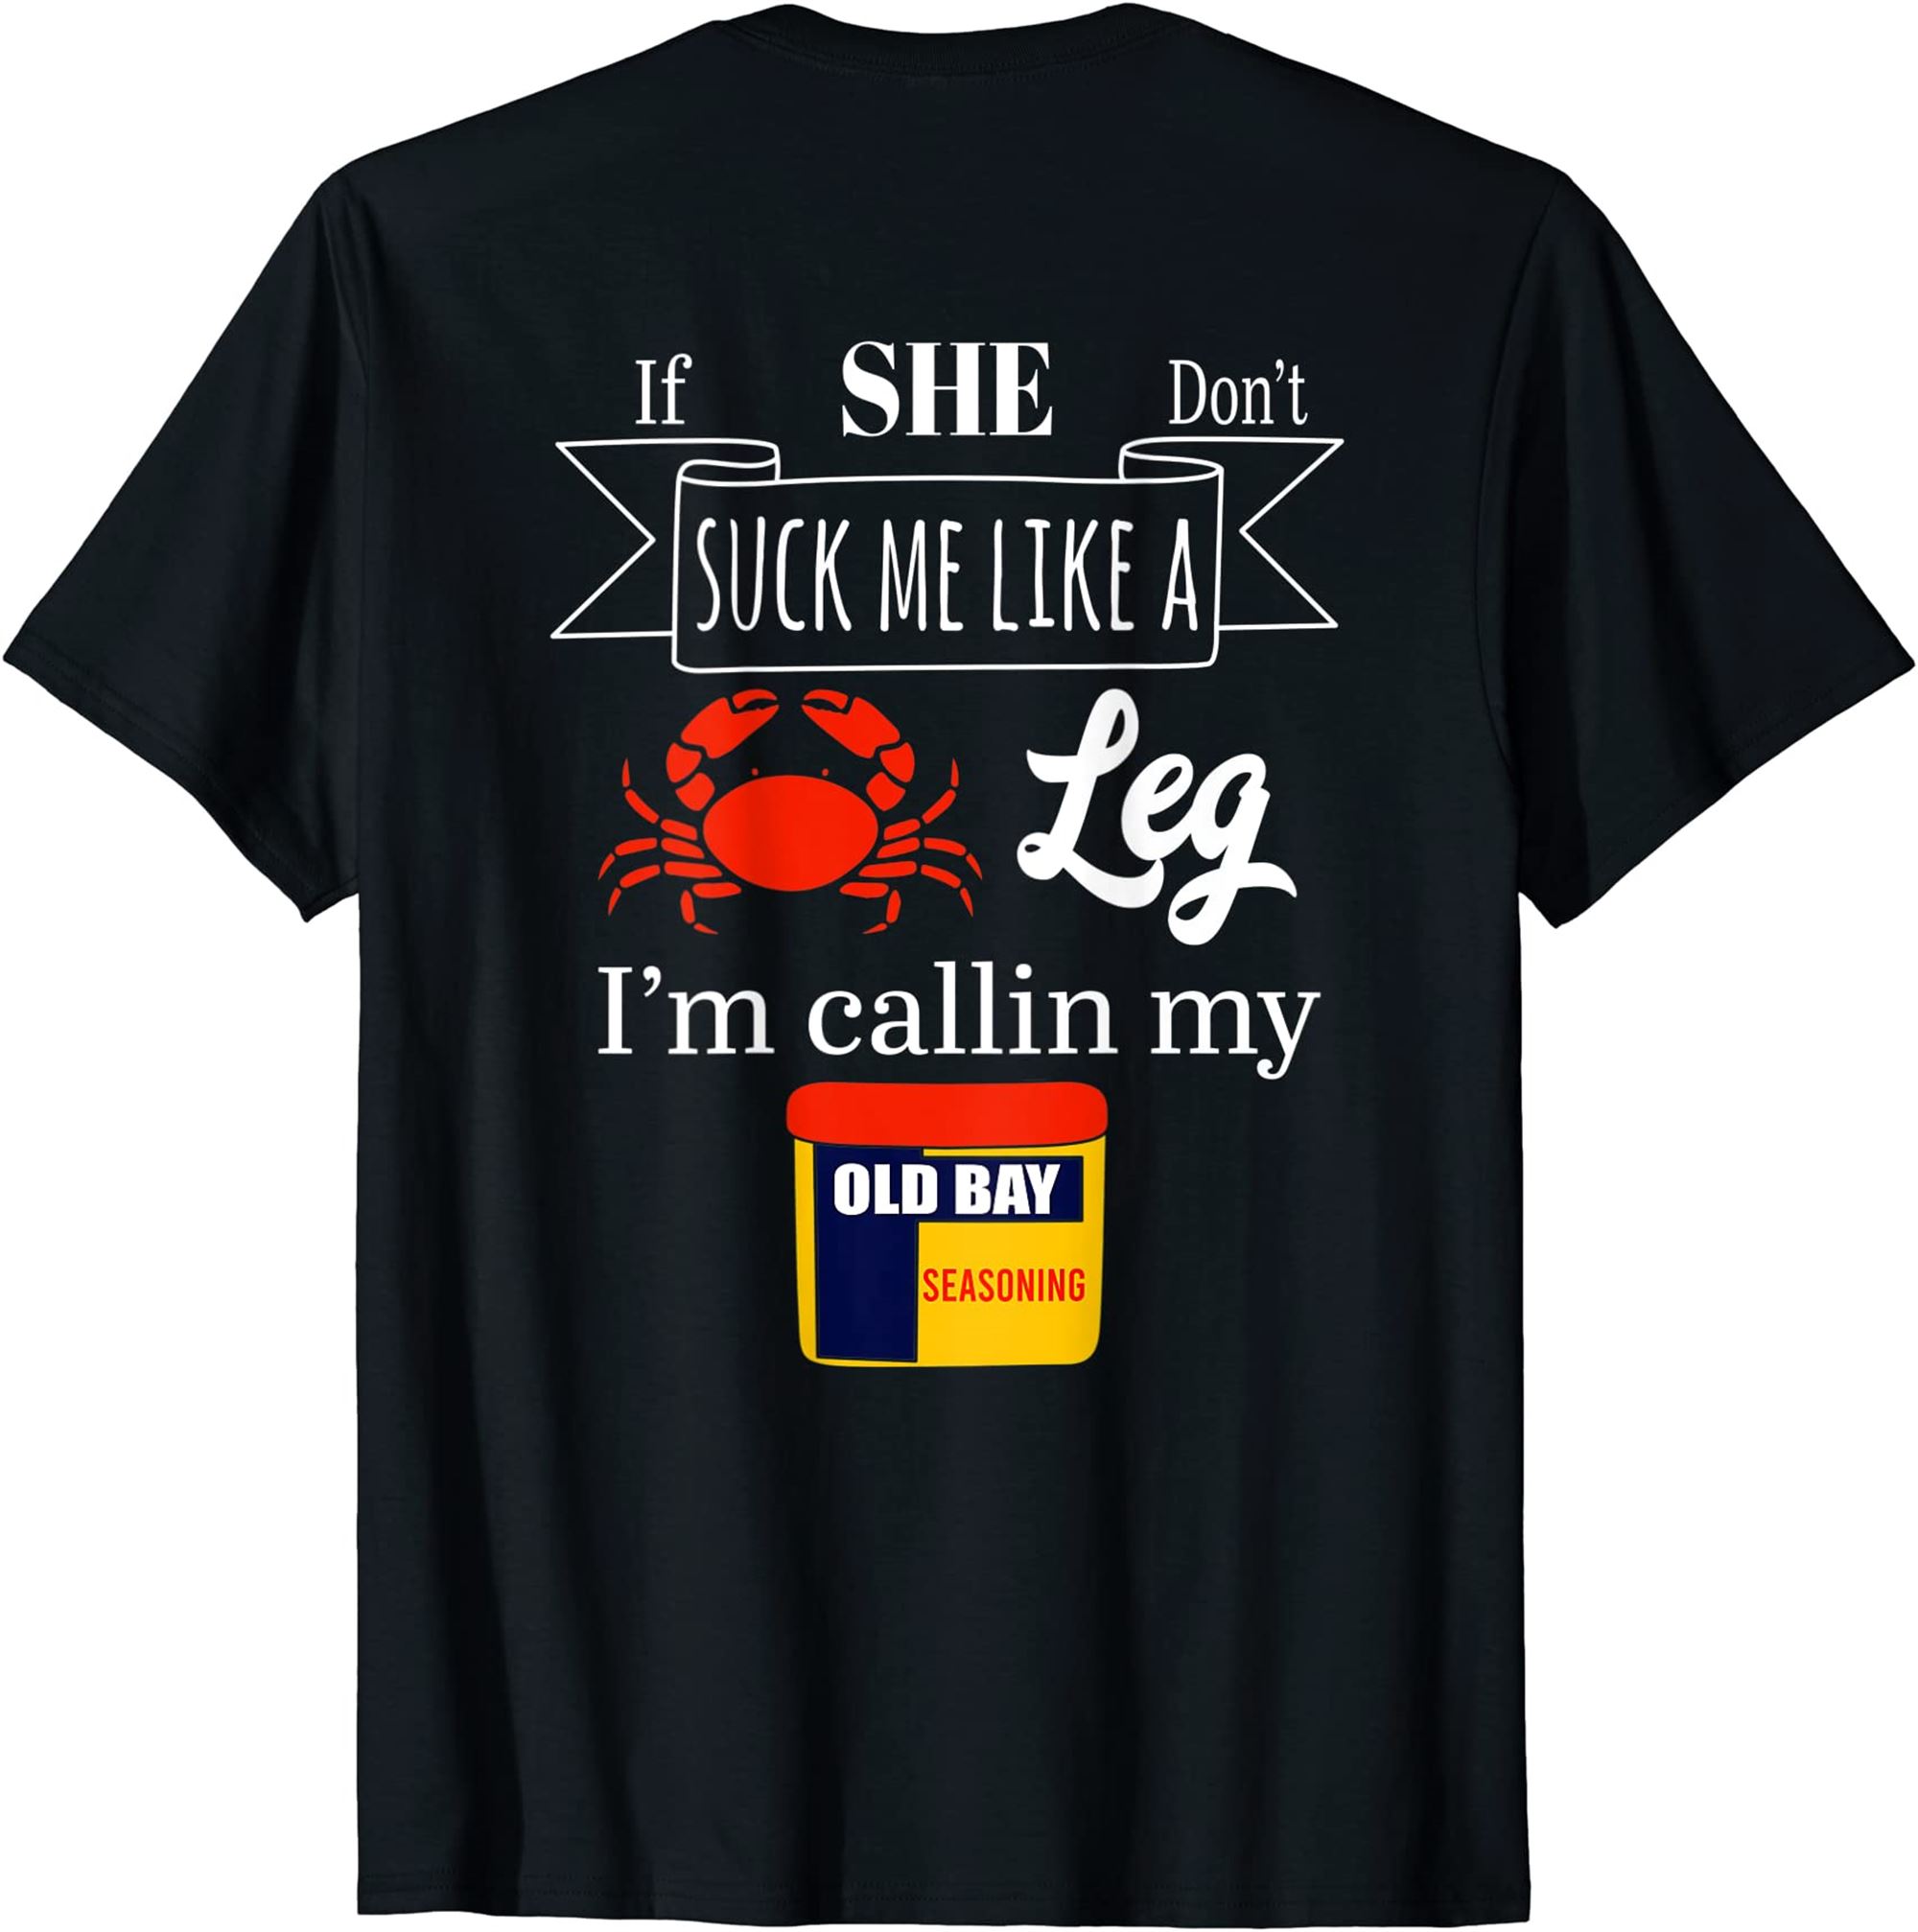 If She Dont Suck Me Like A Crab Leg Im Callin Me T-shirt Full Size Up To 5xl